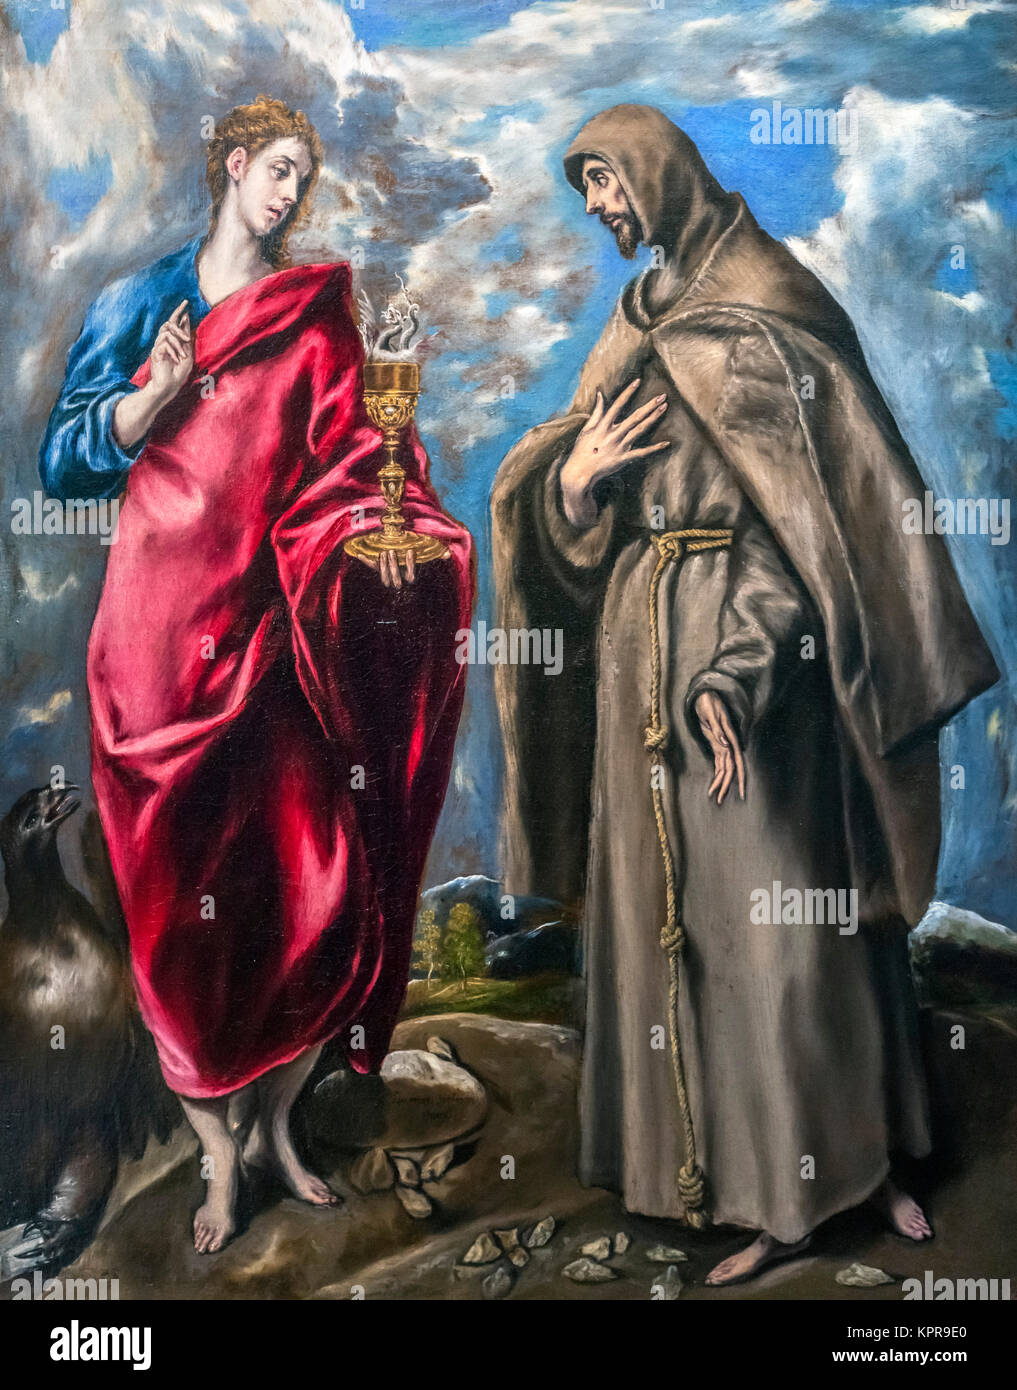 St John the Evangelist and St Francis by El Greco (Domenikos Theotokopoulos, 1541-1614), oil on canvas, c.1600. Stock Photo